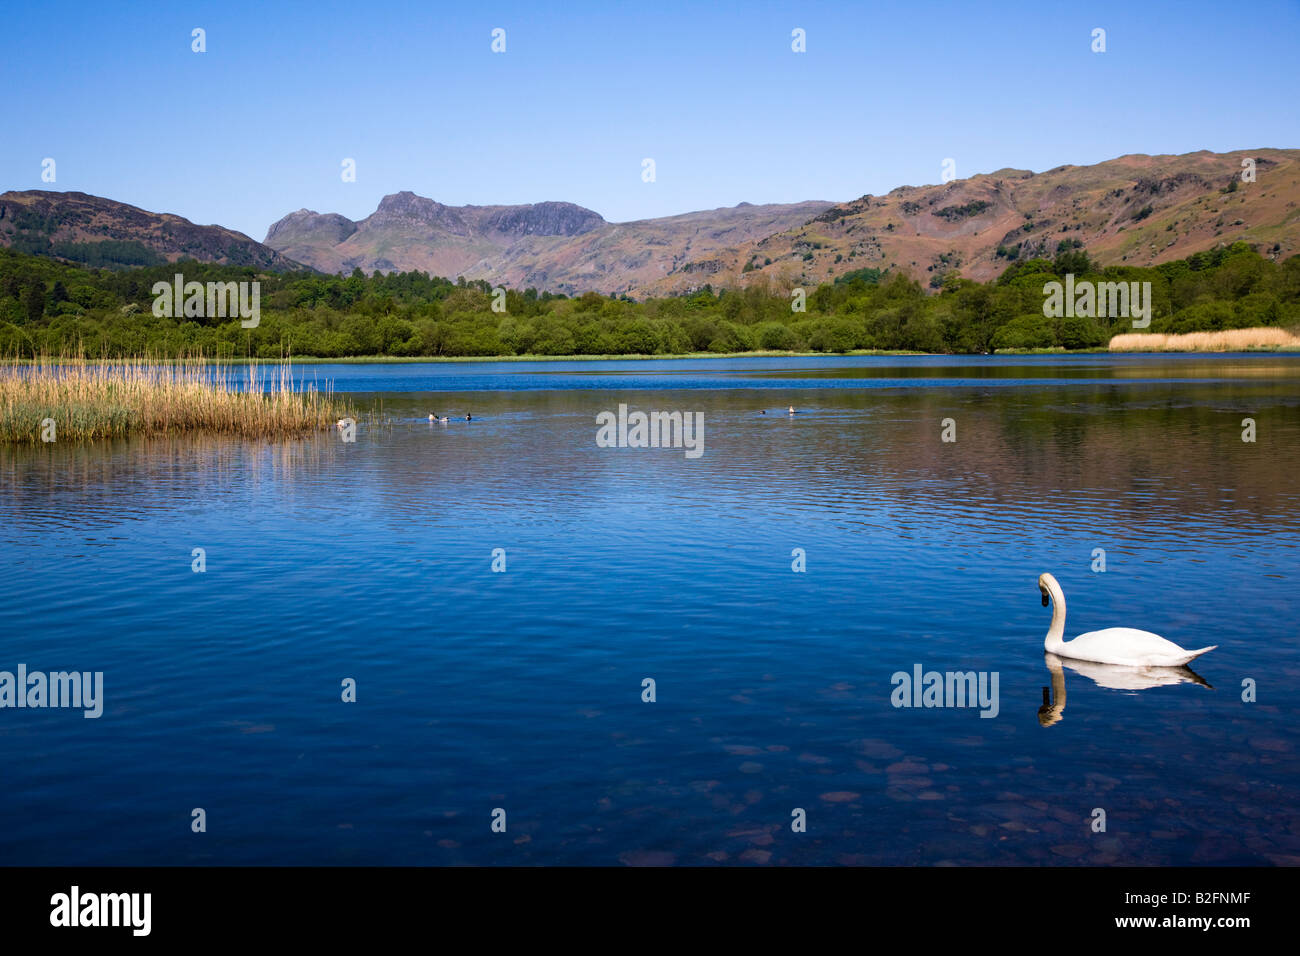 Elter Water Early Spring A Swan On The Lake The Langdales In The Distance, The 'Lake District' Cumbria England UK Stock Photo